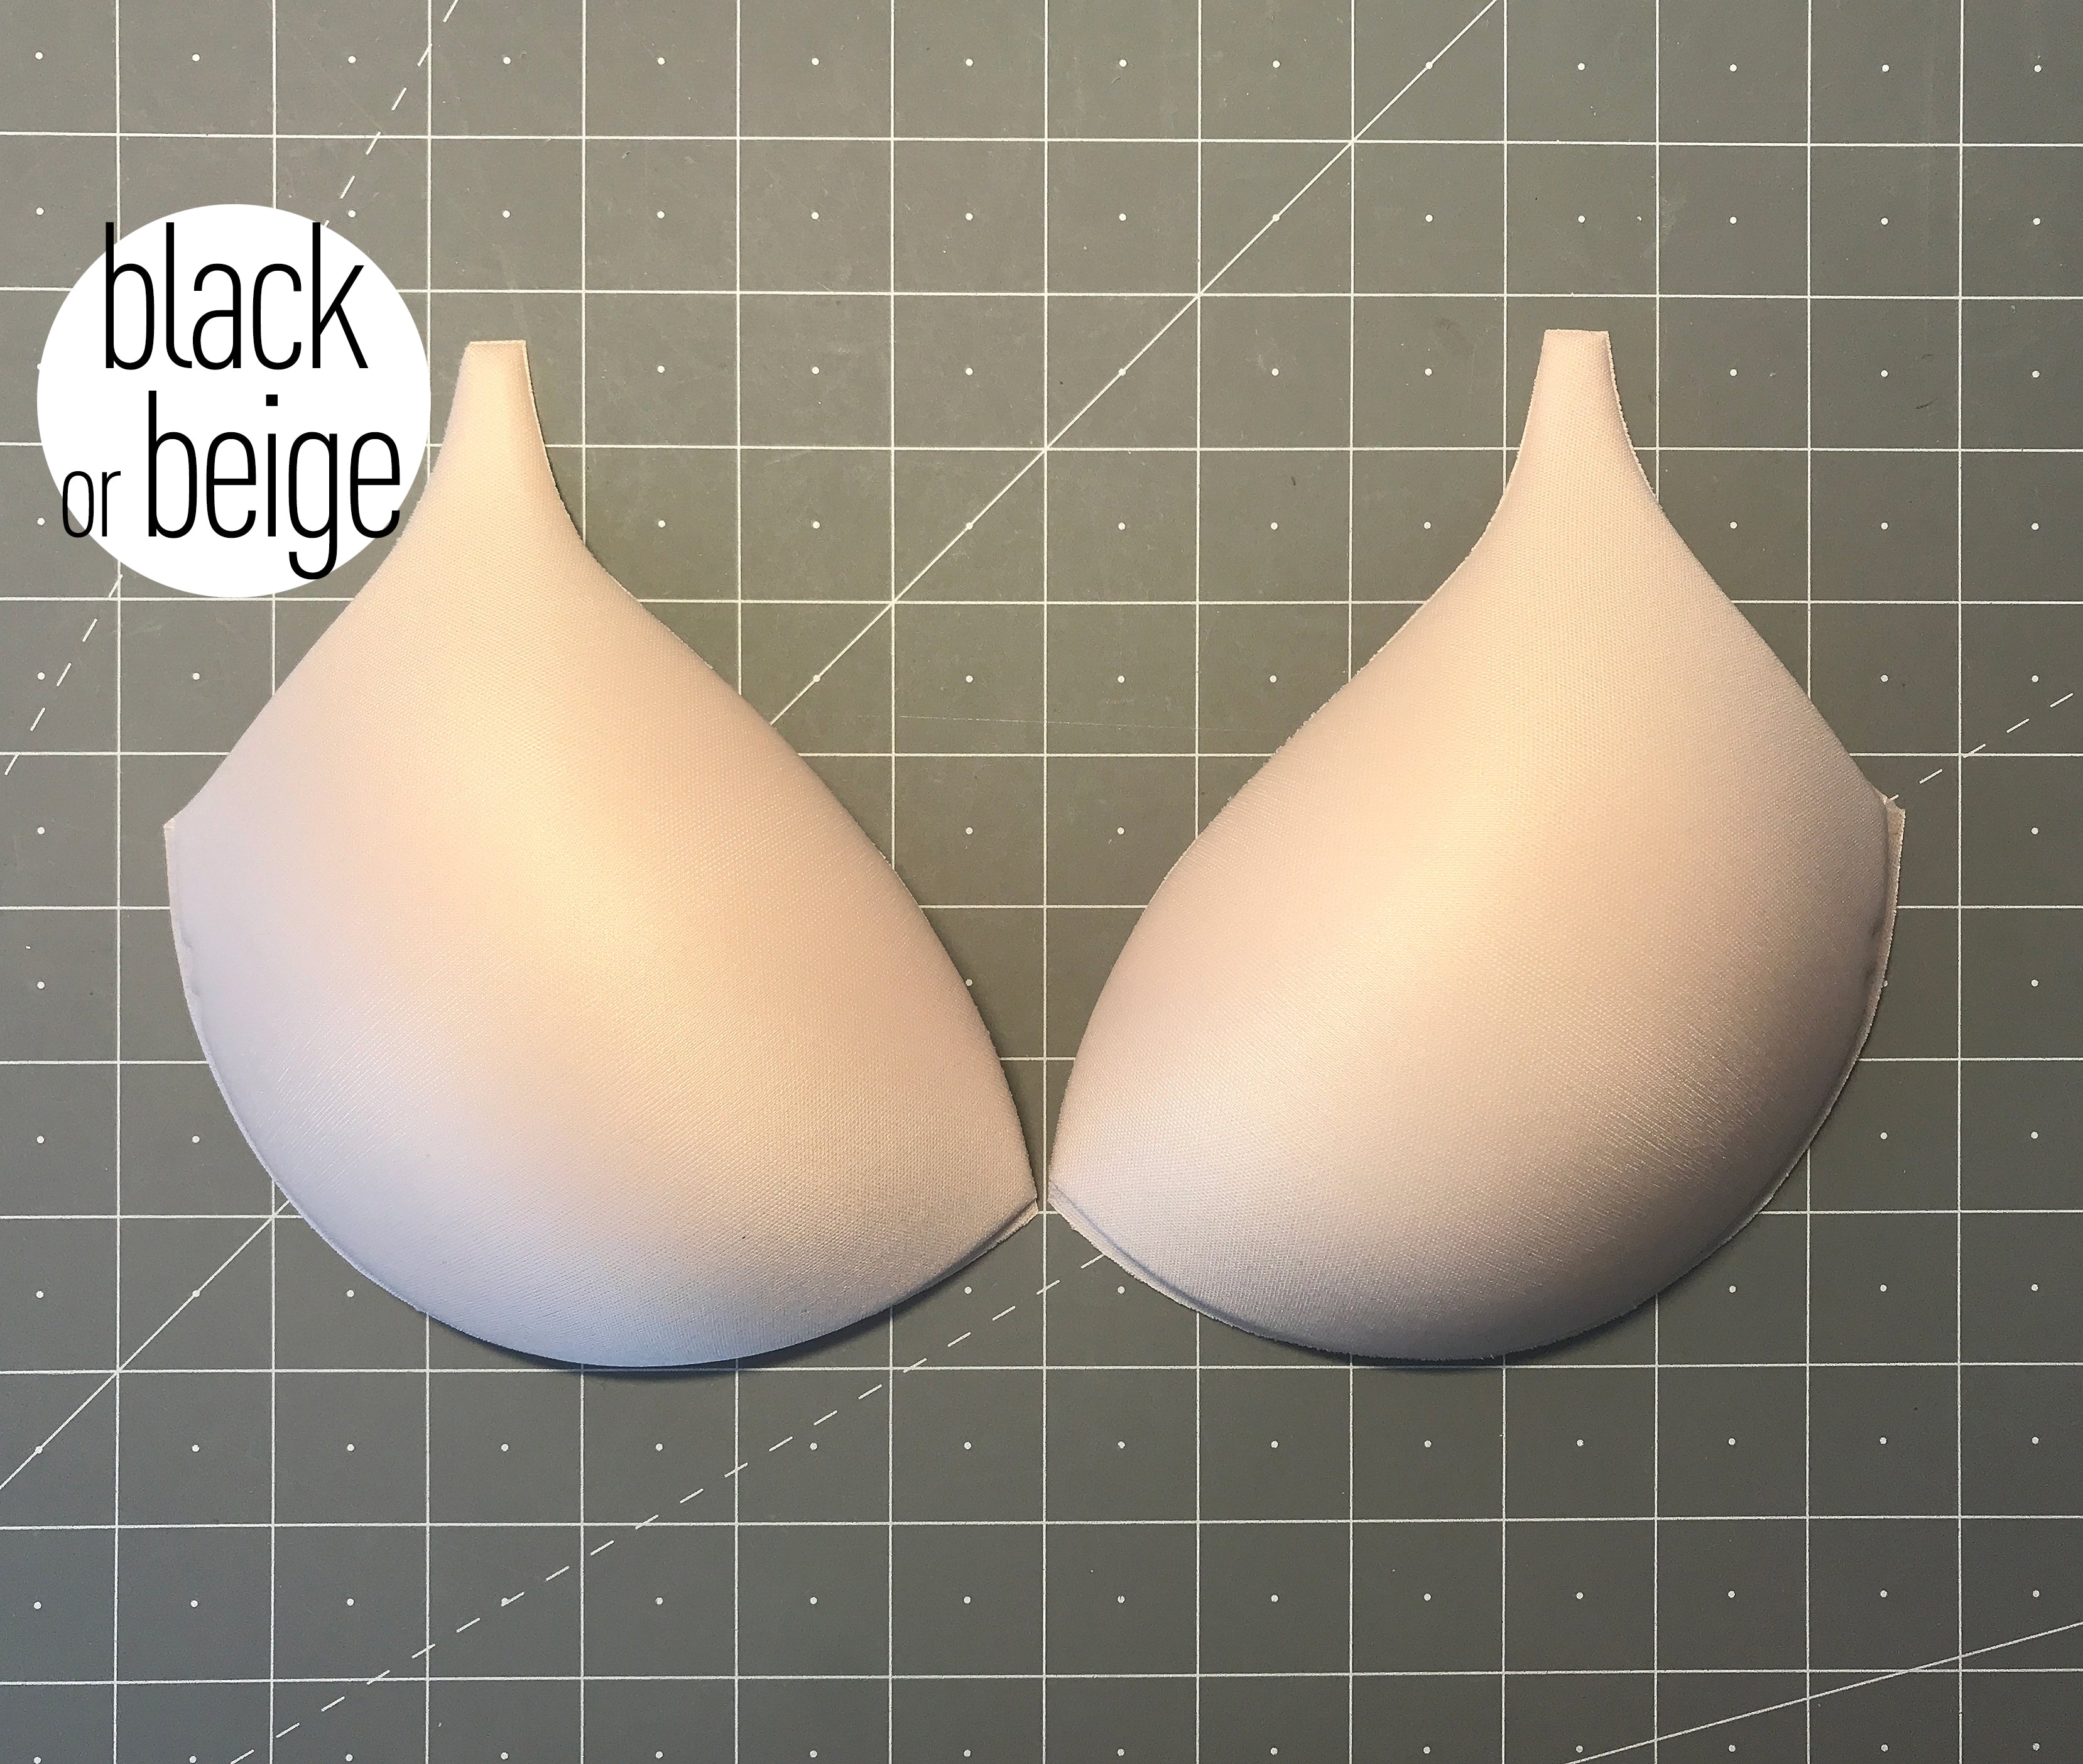 34 b and 32 c boobs are perfect! 😍😍